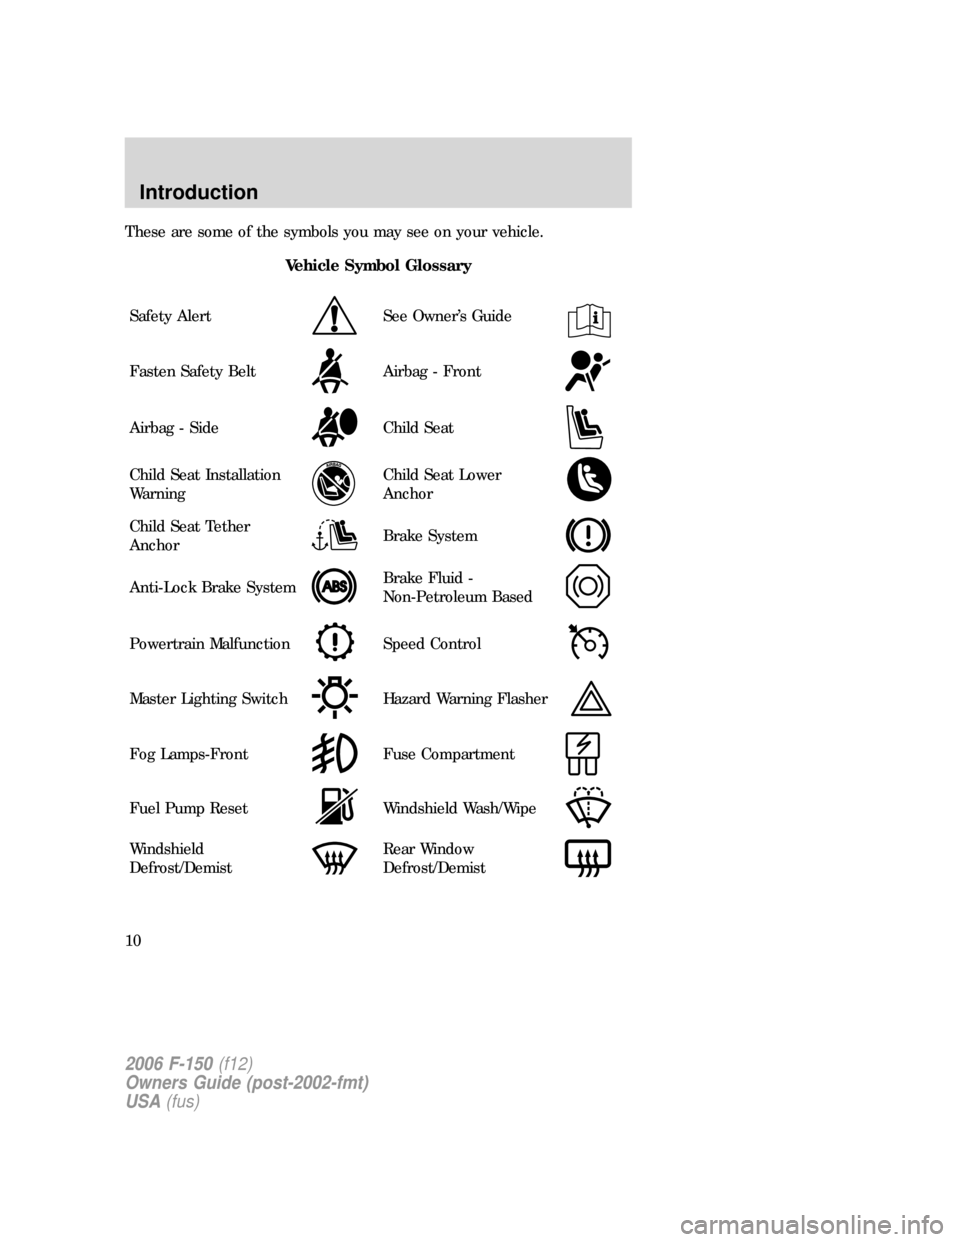 FORD F150 2006 11.G Owners Manual These are some of the symbols you may see on your vehicle.
Vehicle Symbol Glossary
Safety Alert
See Owner’s Guide
Fasten Safety BeltAirbag - Front
Airbag - SideChild Seat
Child Seat Installation
War